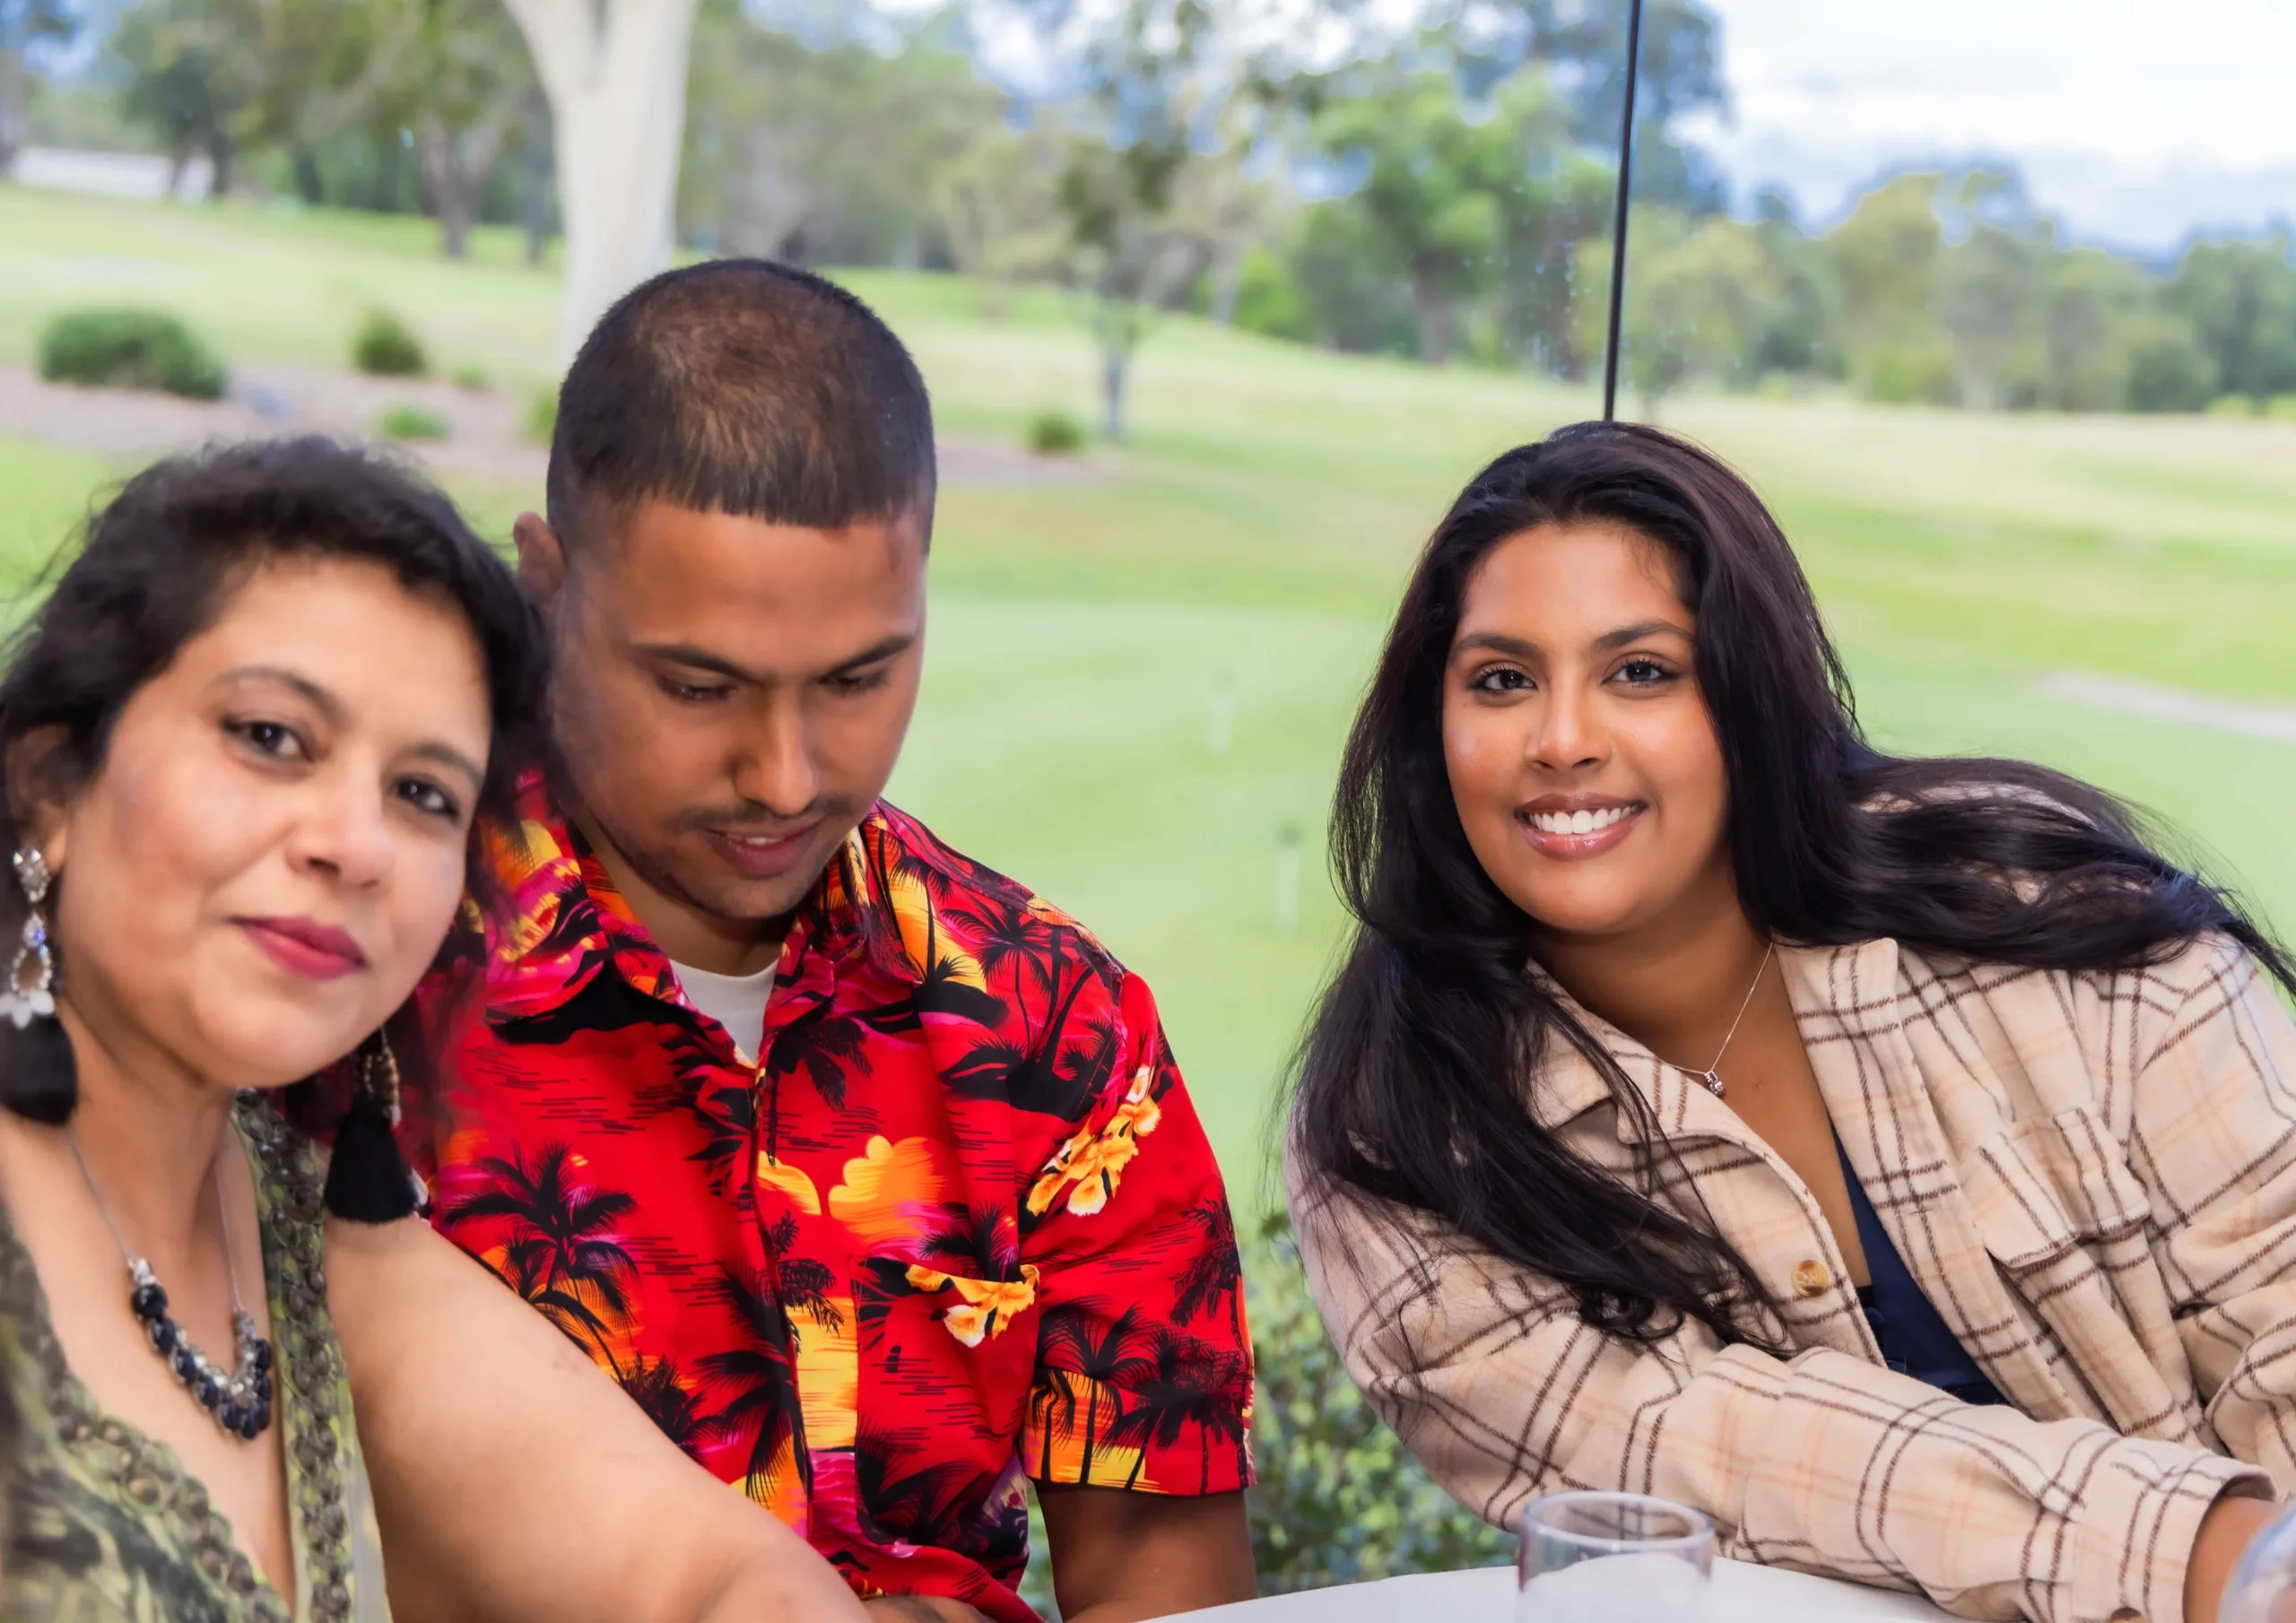 Three diverse individuals sitting at an outdoor event